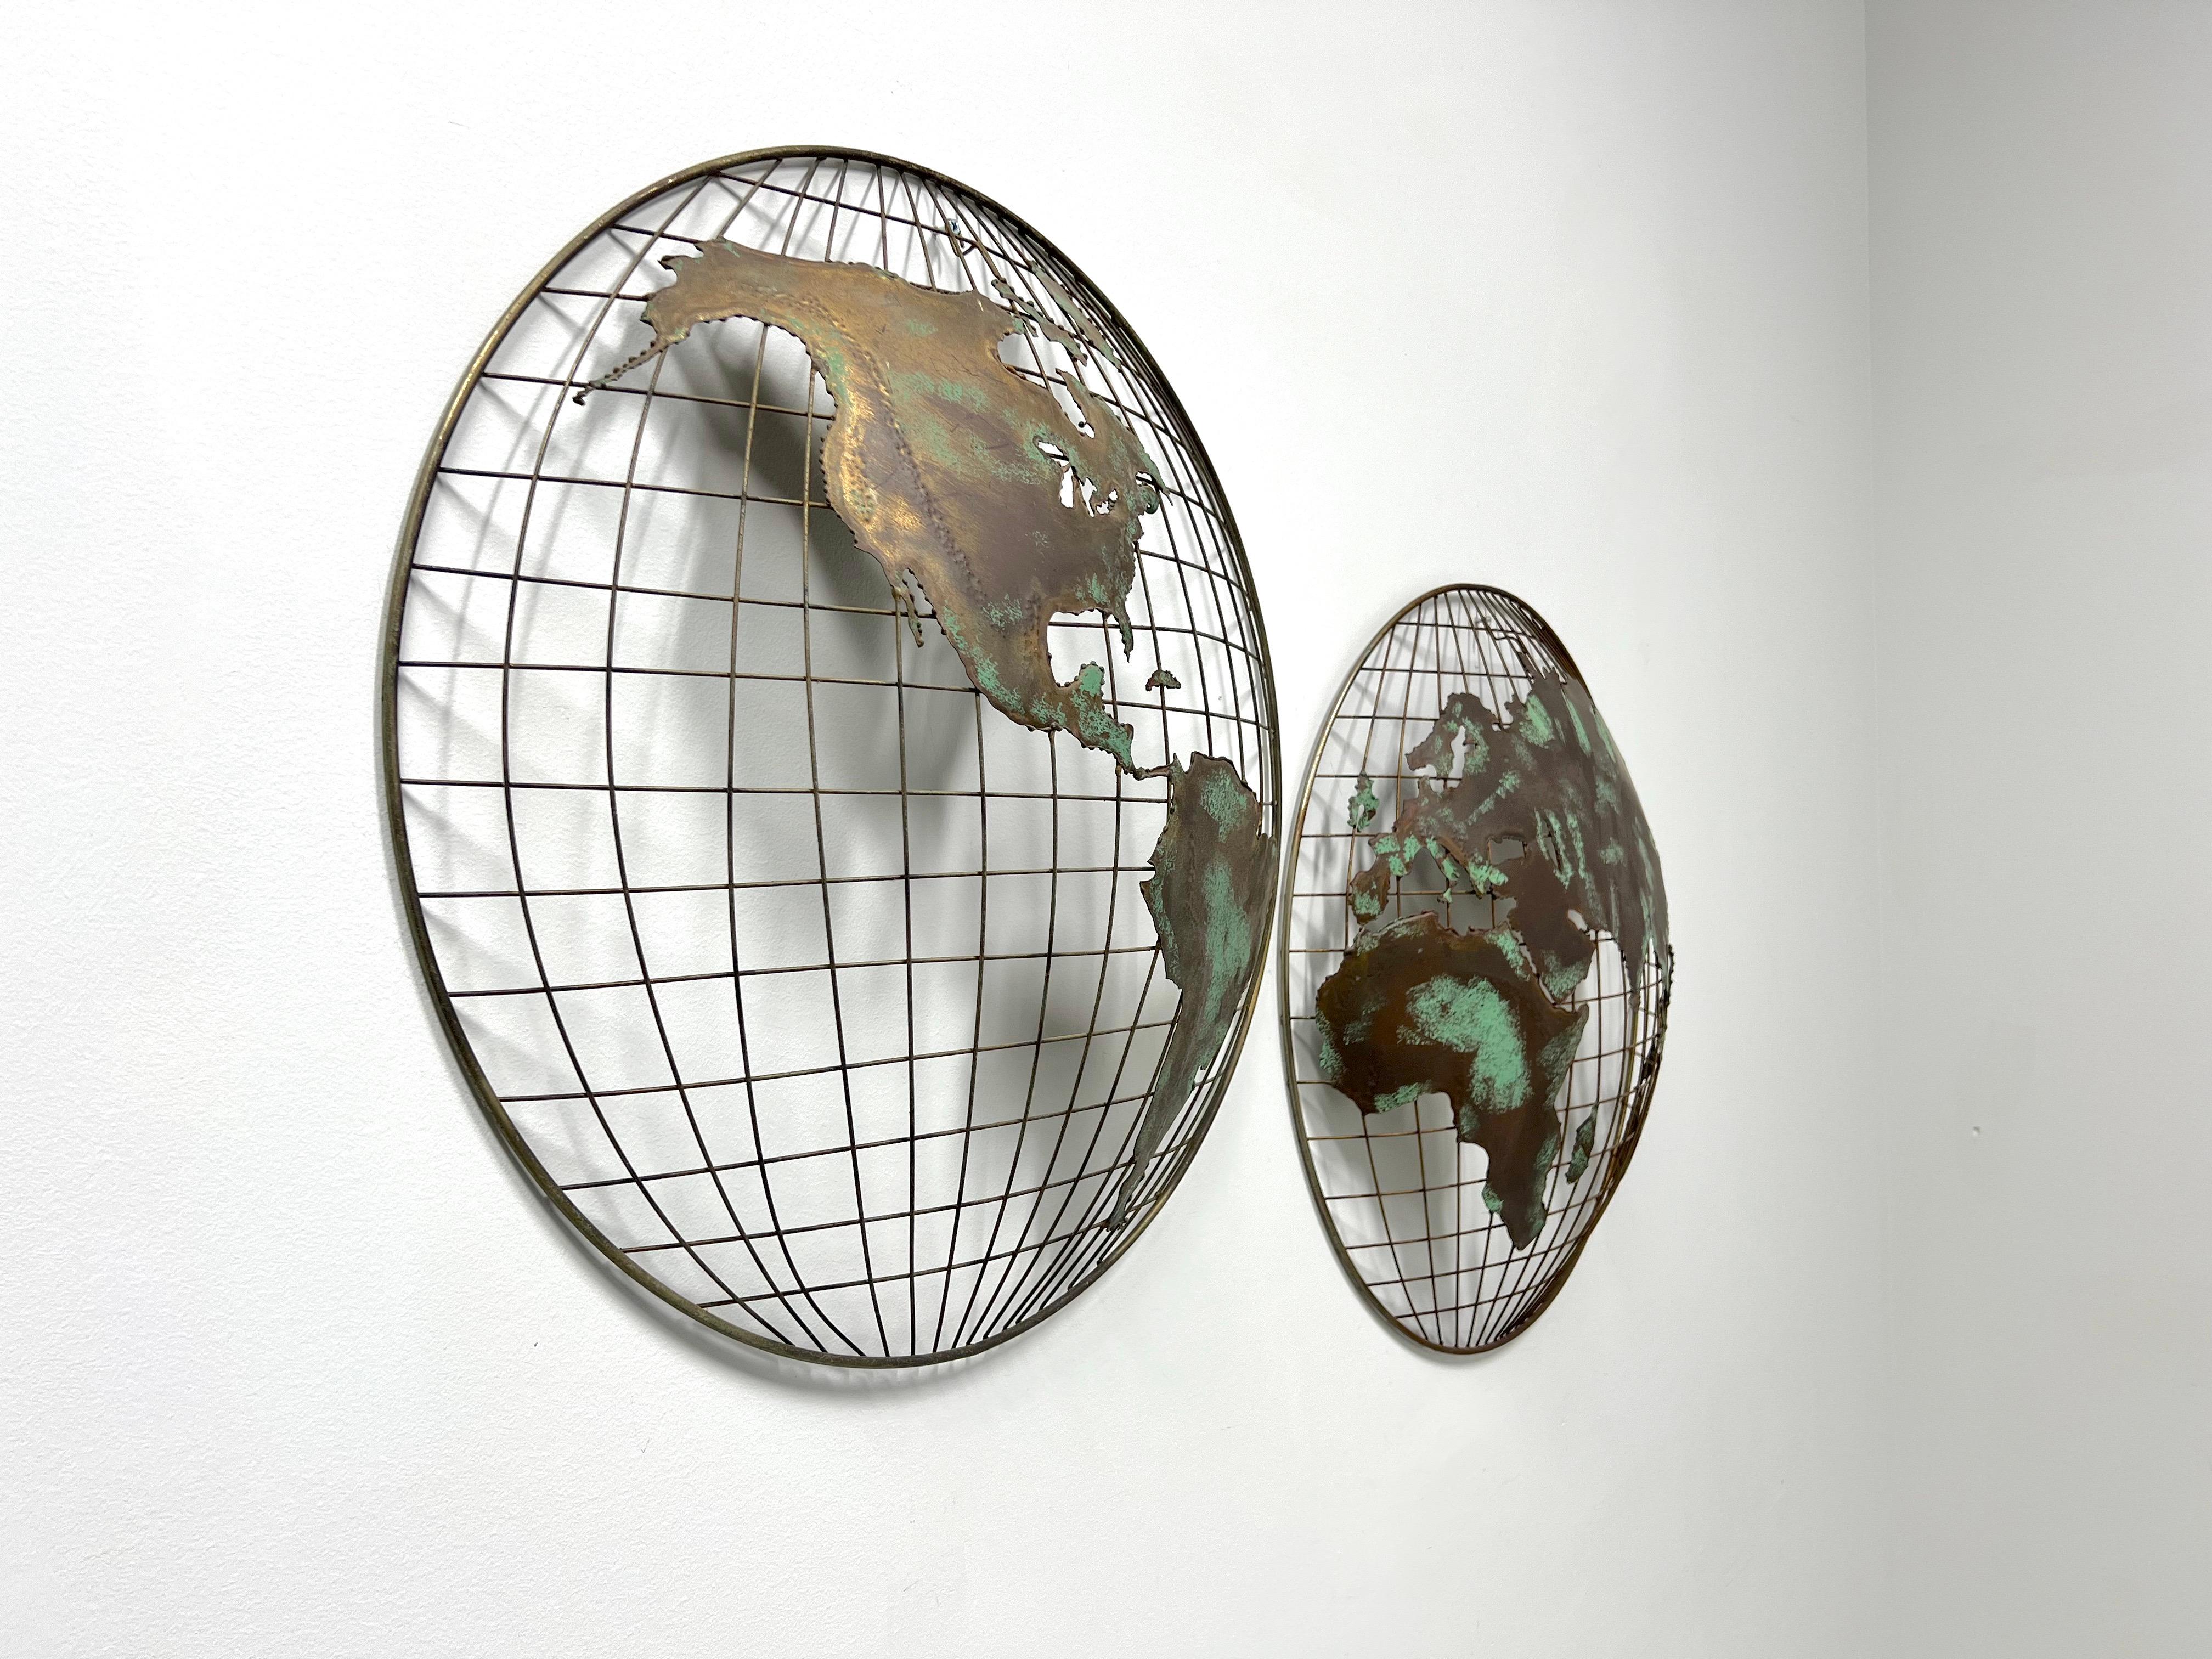 A companion pair of Brutalist style globe hemispheres metal sculptures. Unsigned, in the manner of Curtis Jere. Patinated bronze color solid metal forming the clearly visible continents over open mesh-like metal forming the latitude and longitude